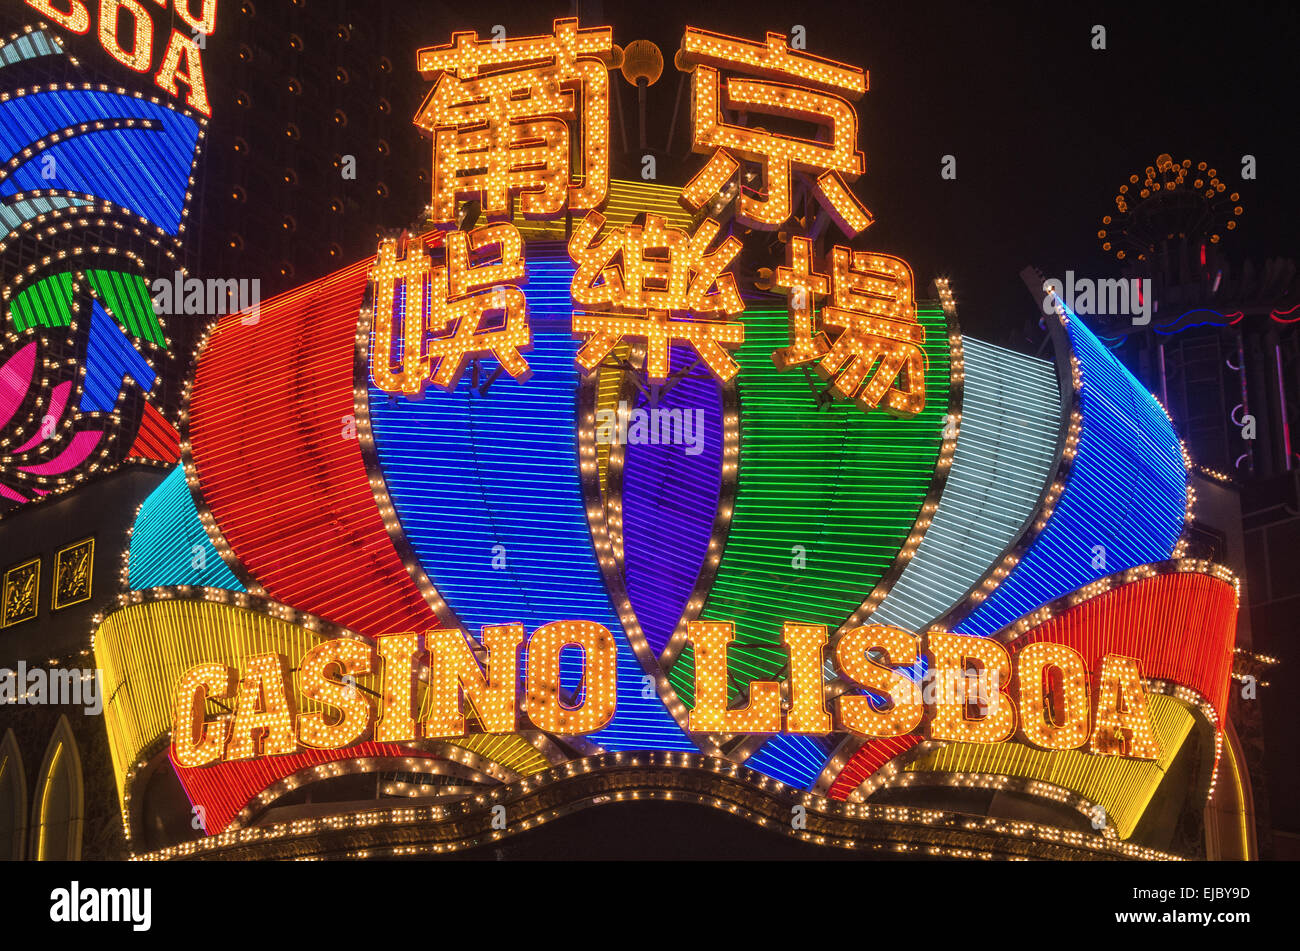 5 Best Ways To Sell casino